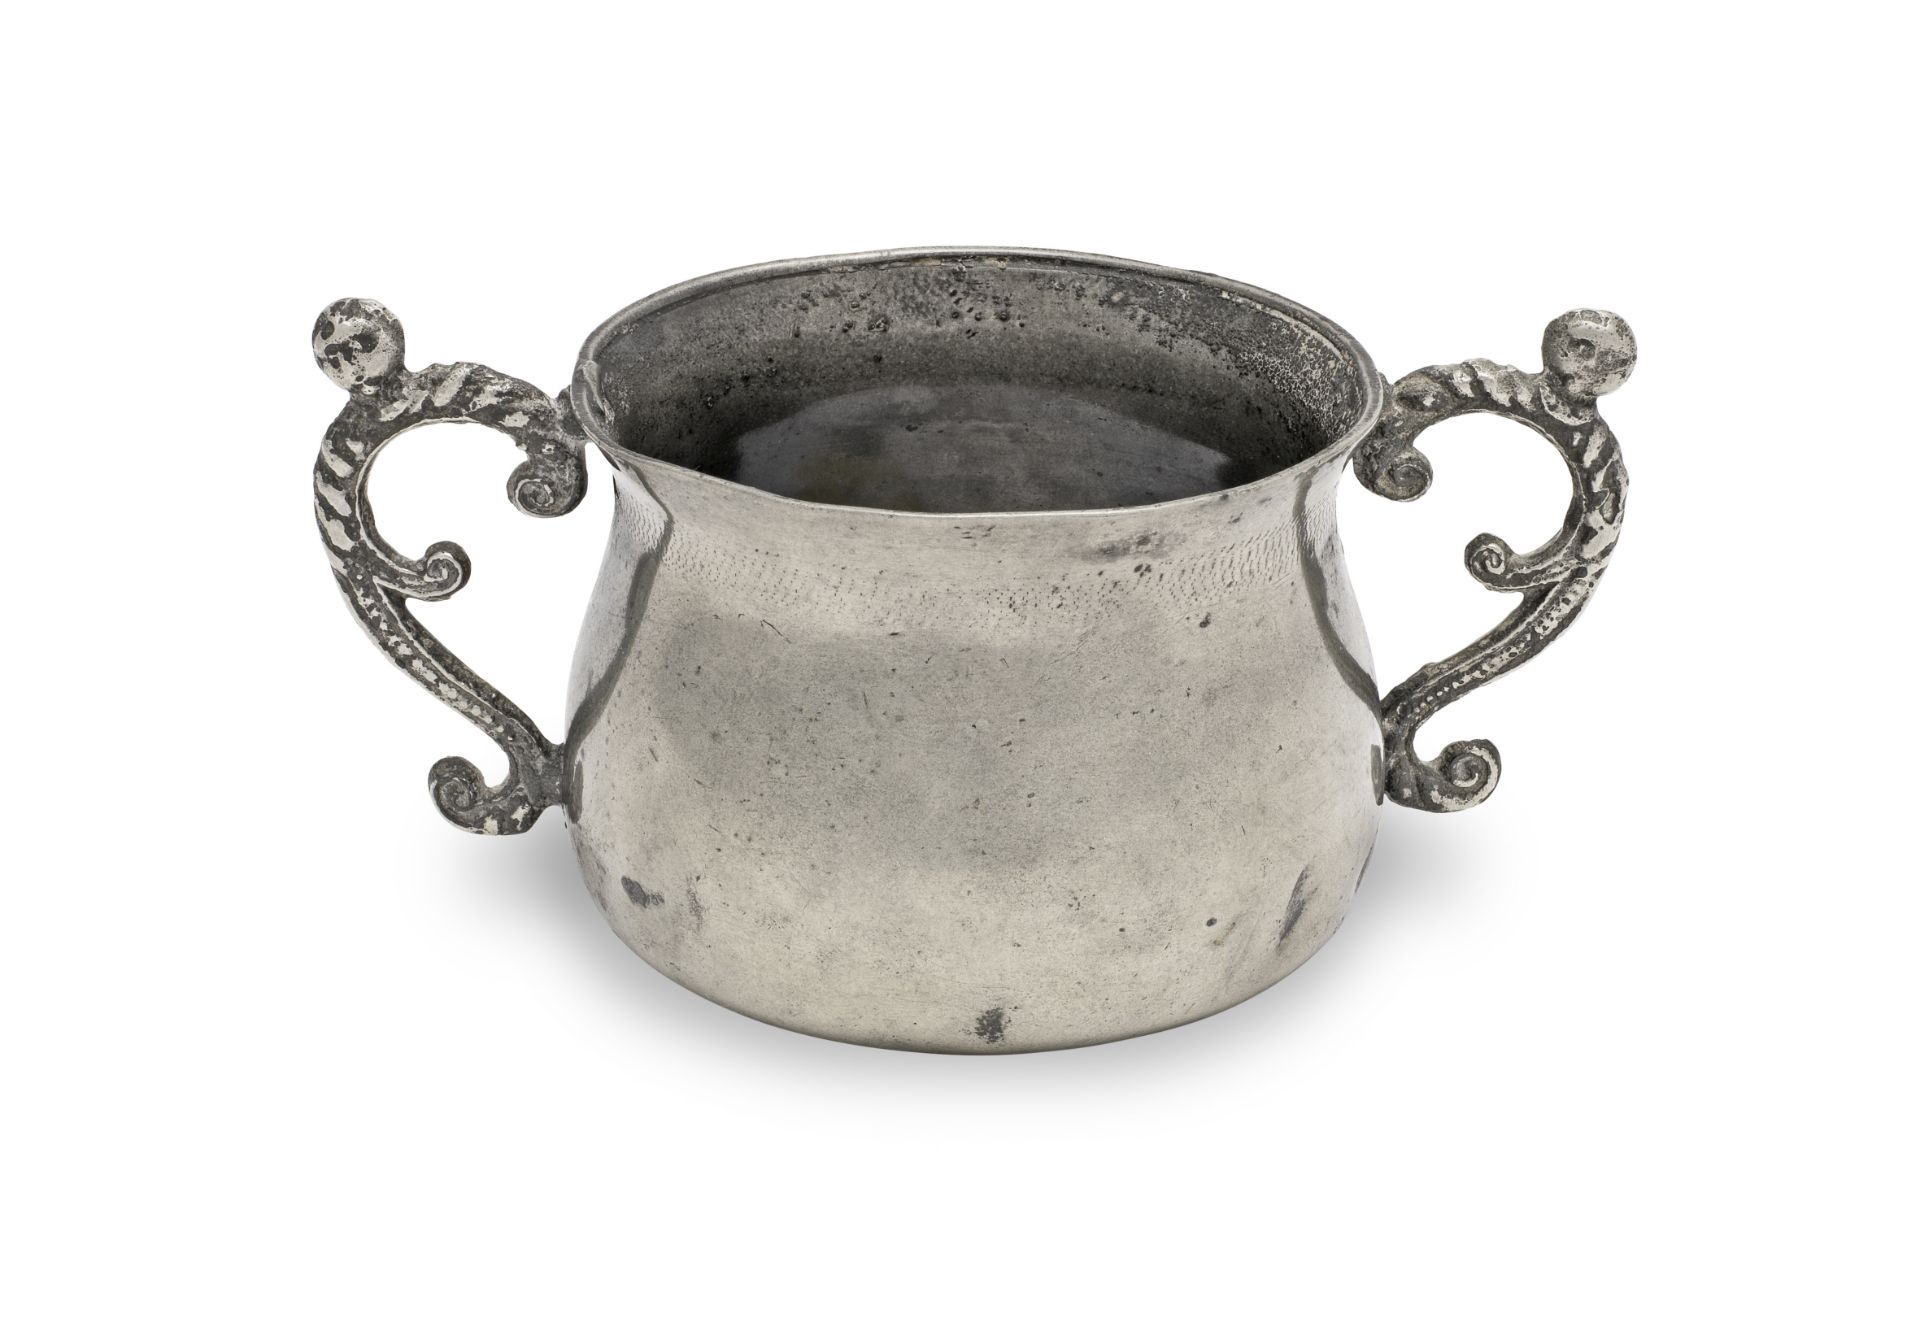 A rare, fine and documented Charles II pewter two-handled caudle or posset cup, circa 1660